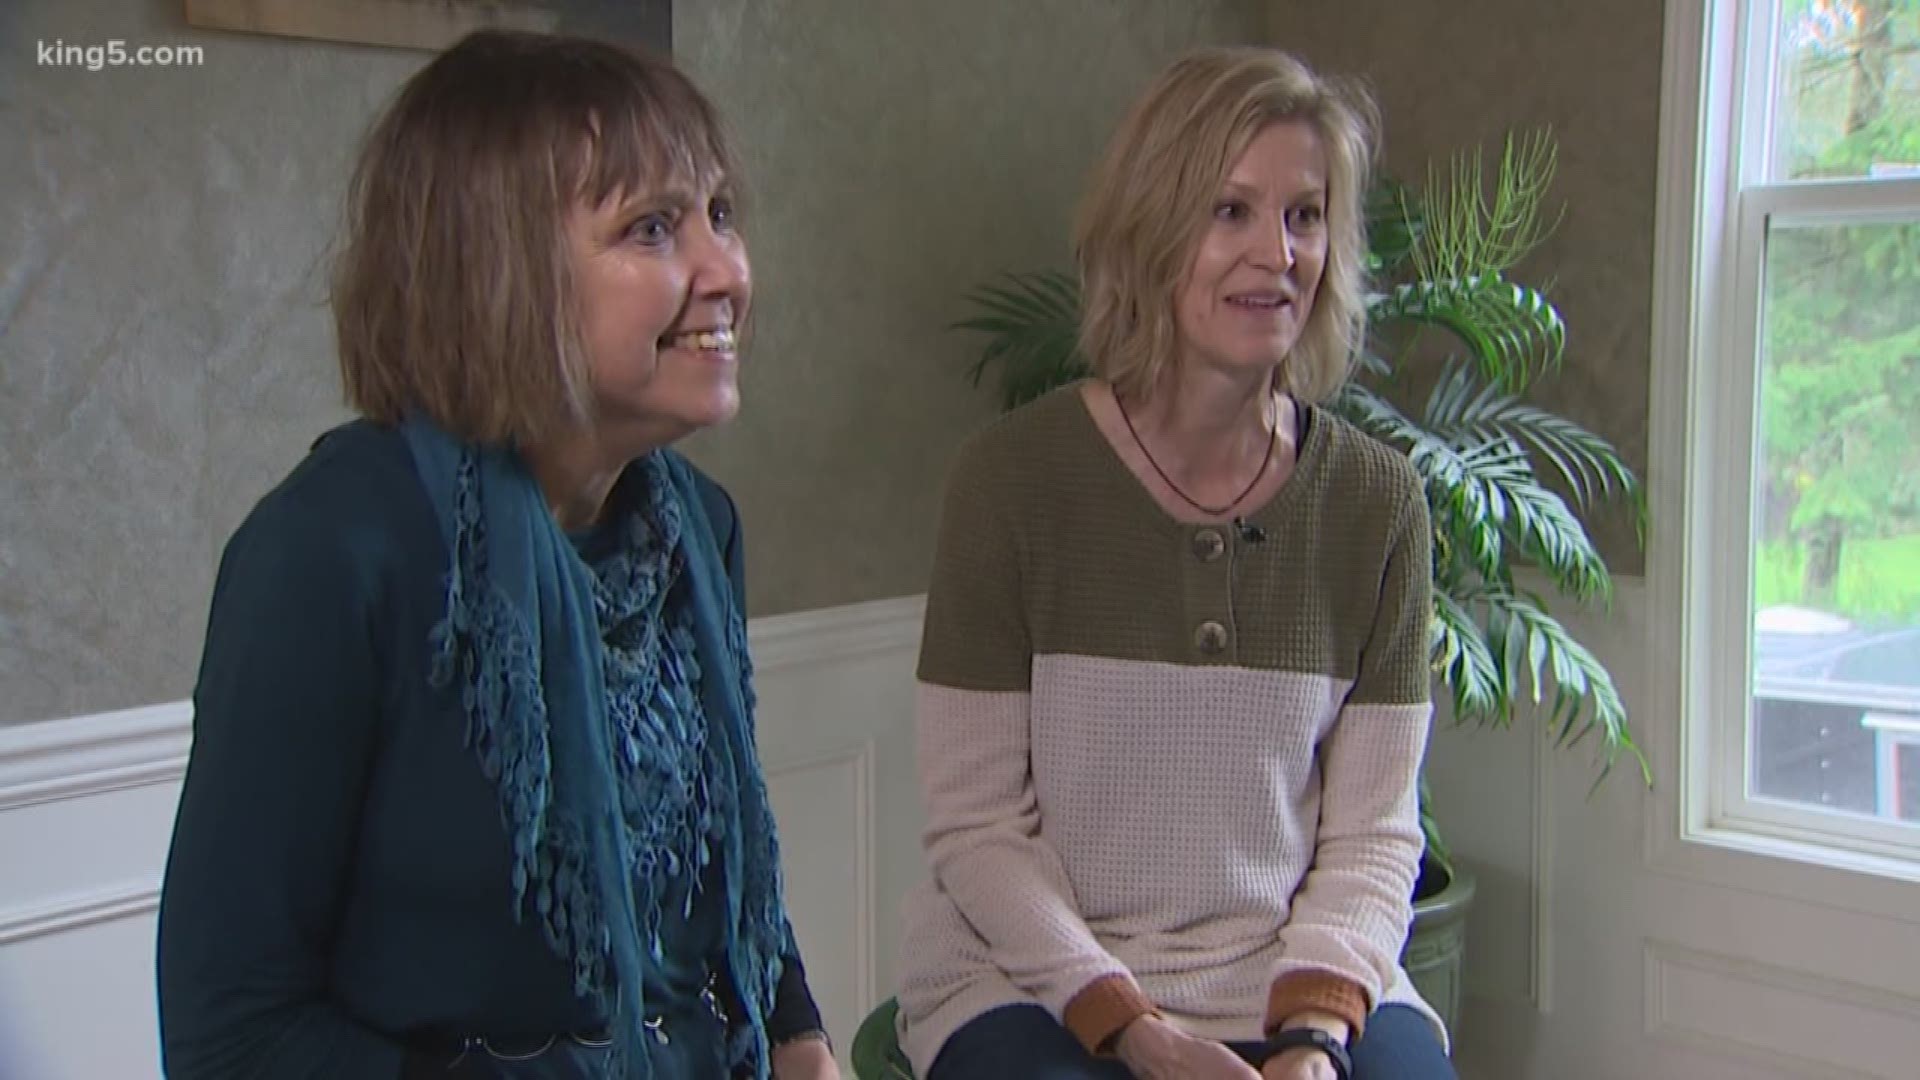 A Marysville teacher's aid didn't hesitate to donate her kidney when a co-worker she barely knew said she was being added to the transplant list.